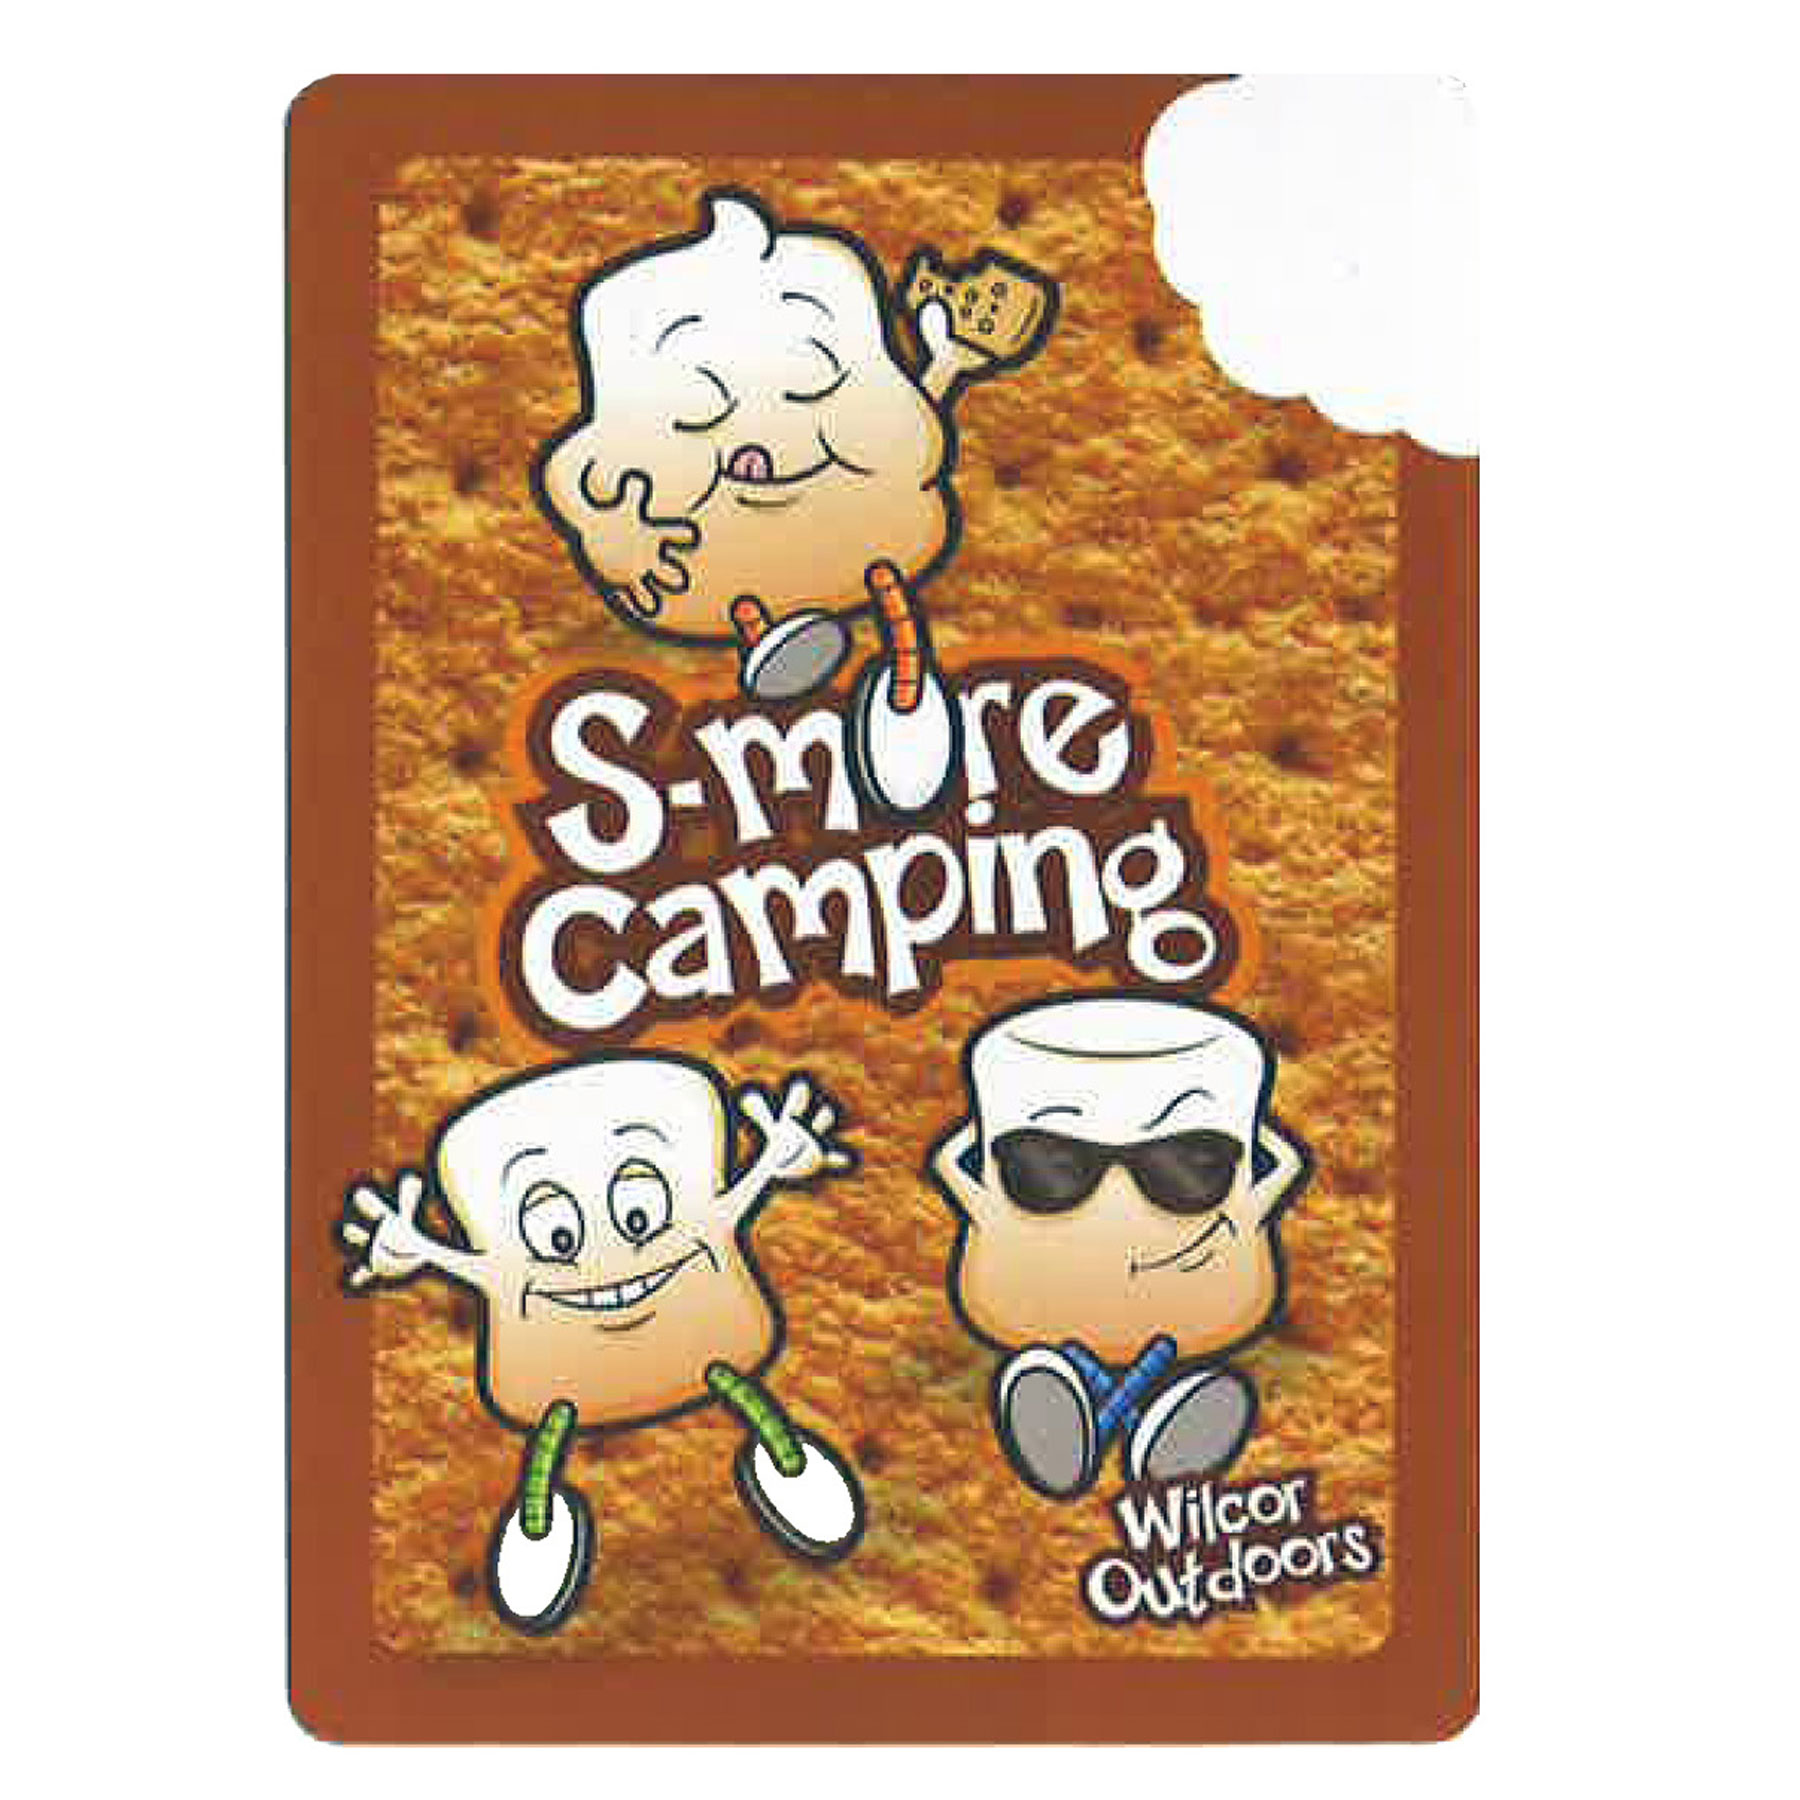 S-MORE CAMPING PLAYING CARDS